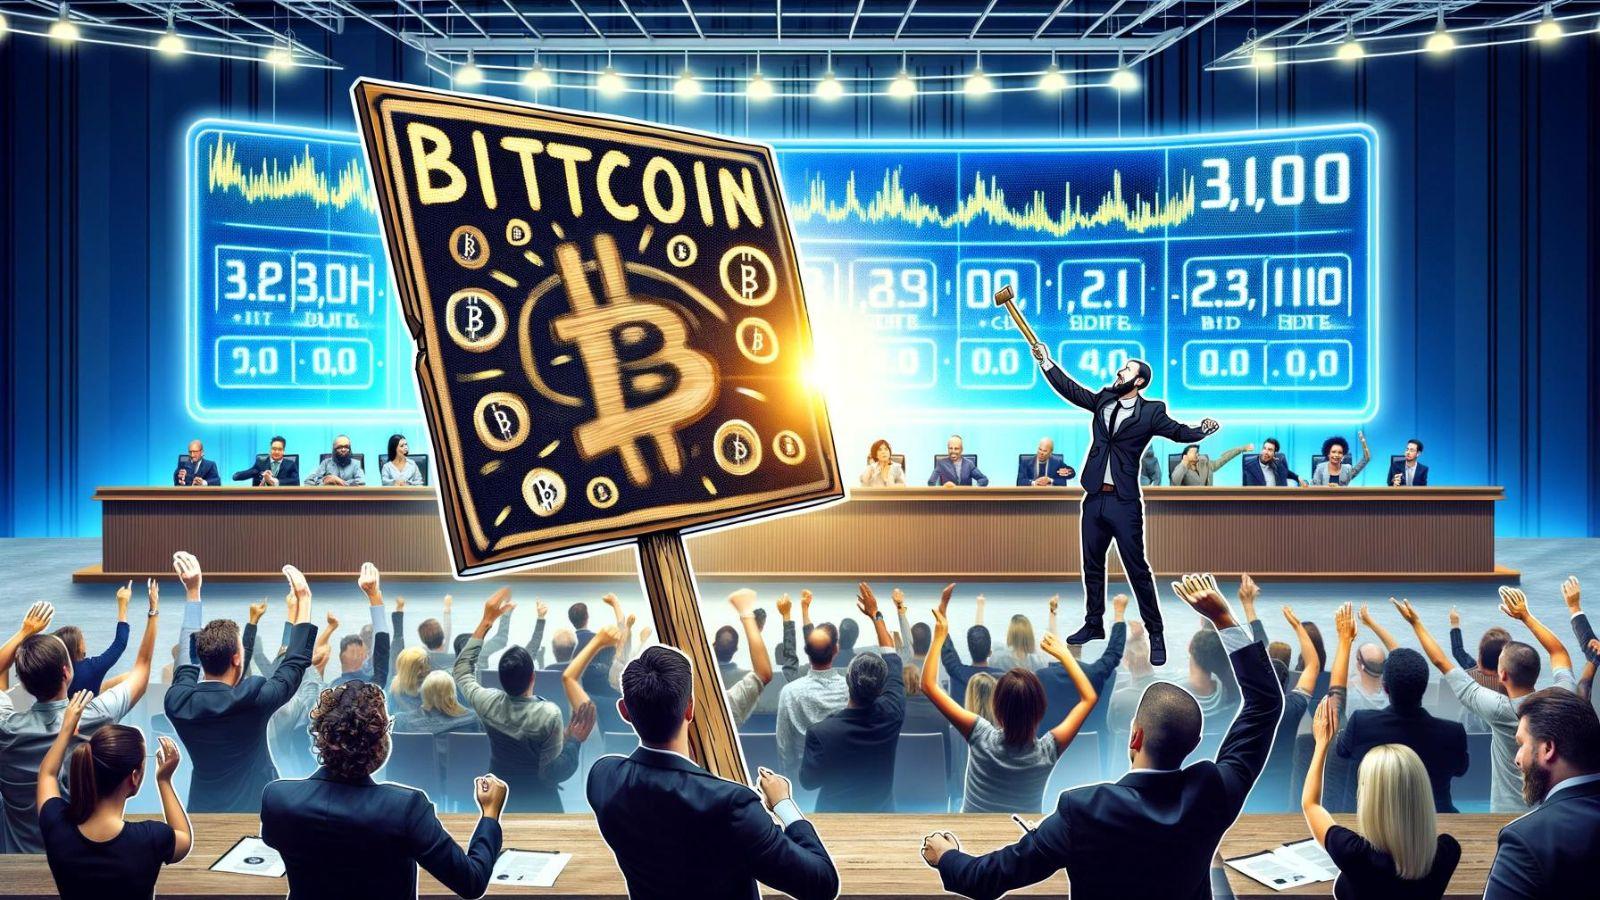 Bitcoin Sign Guy auctioning his sign in an auction room